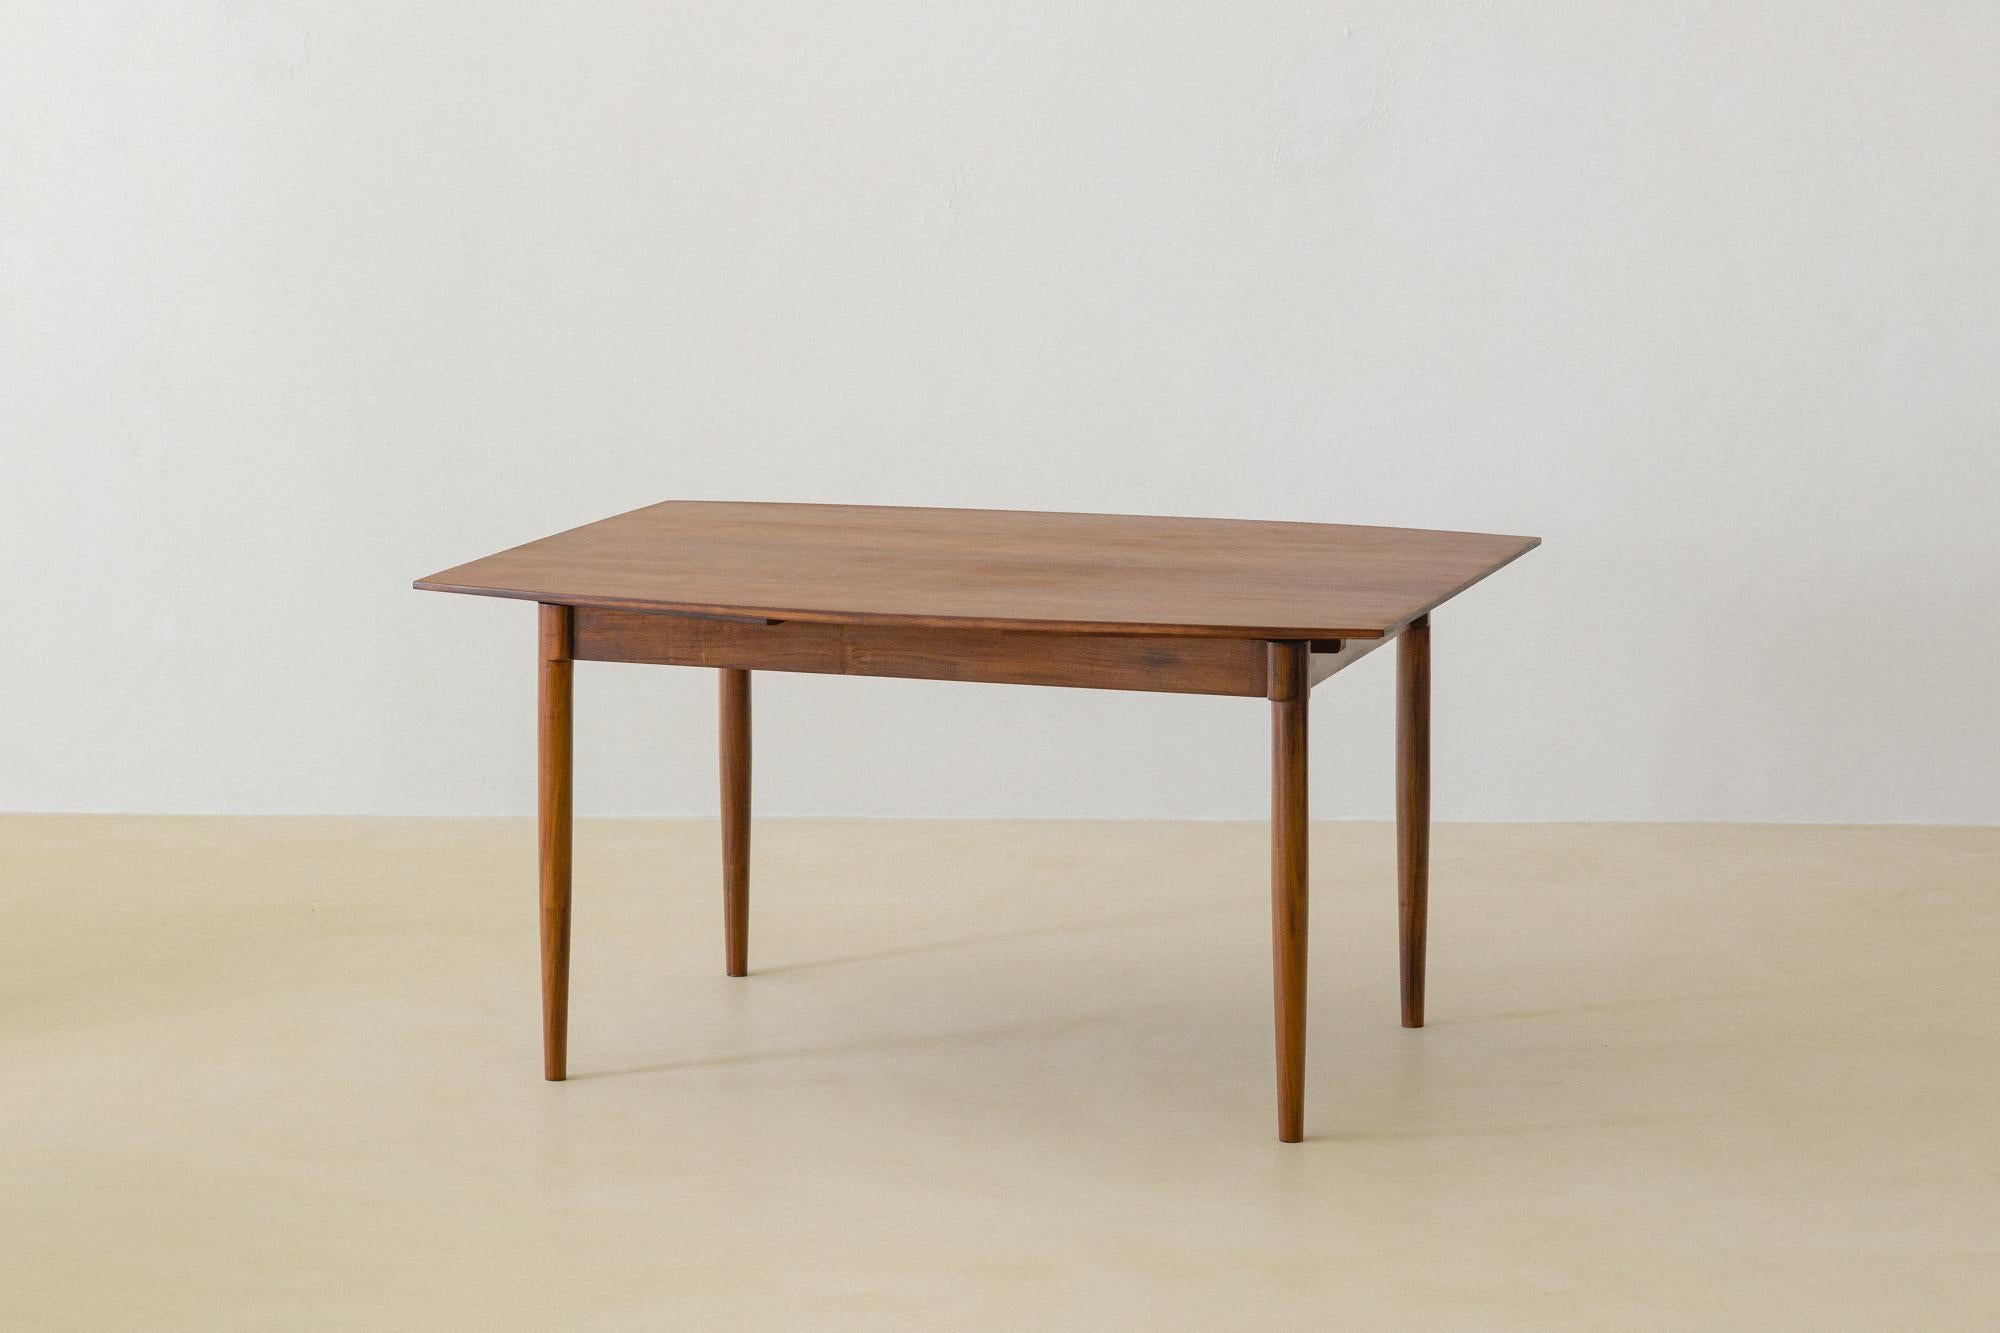 Expandable Dining Table in Caviuna by Carlo Hauner, Brazilian Midcentury, 1950s For Sale 2